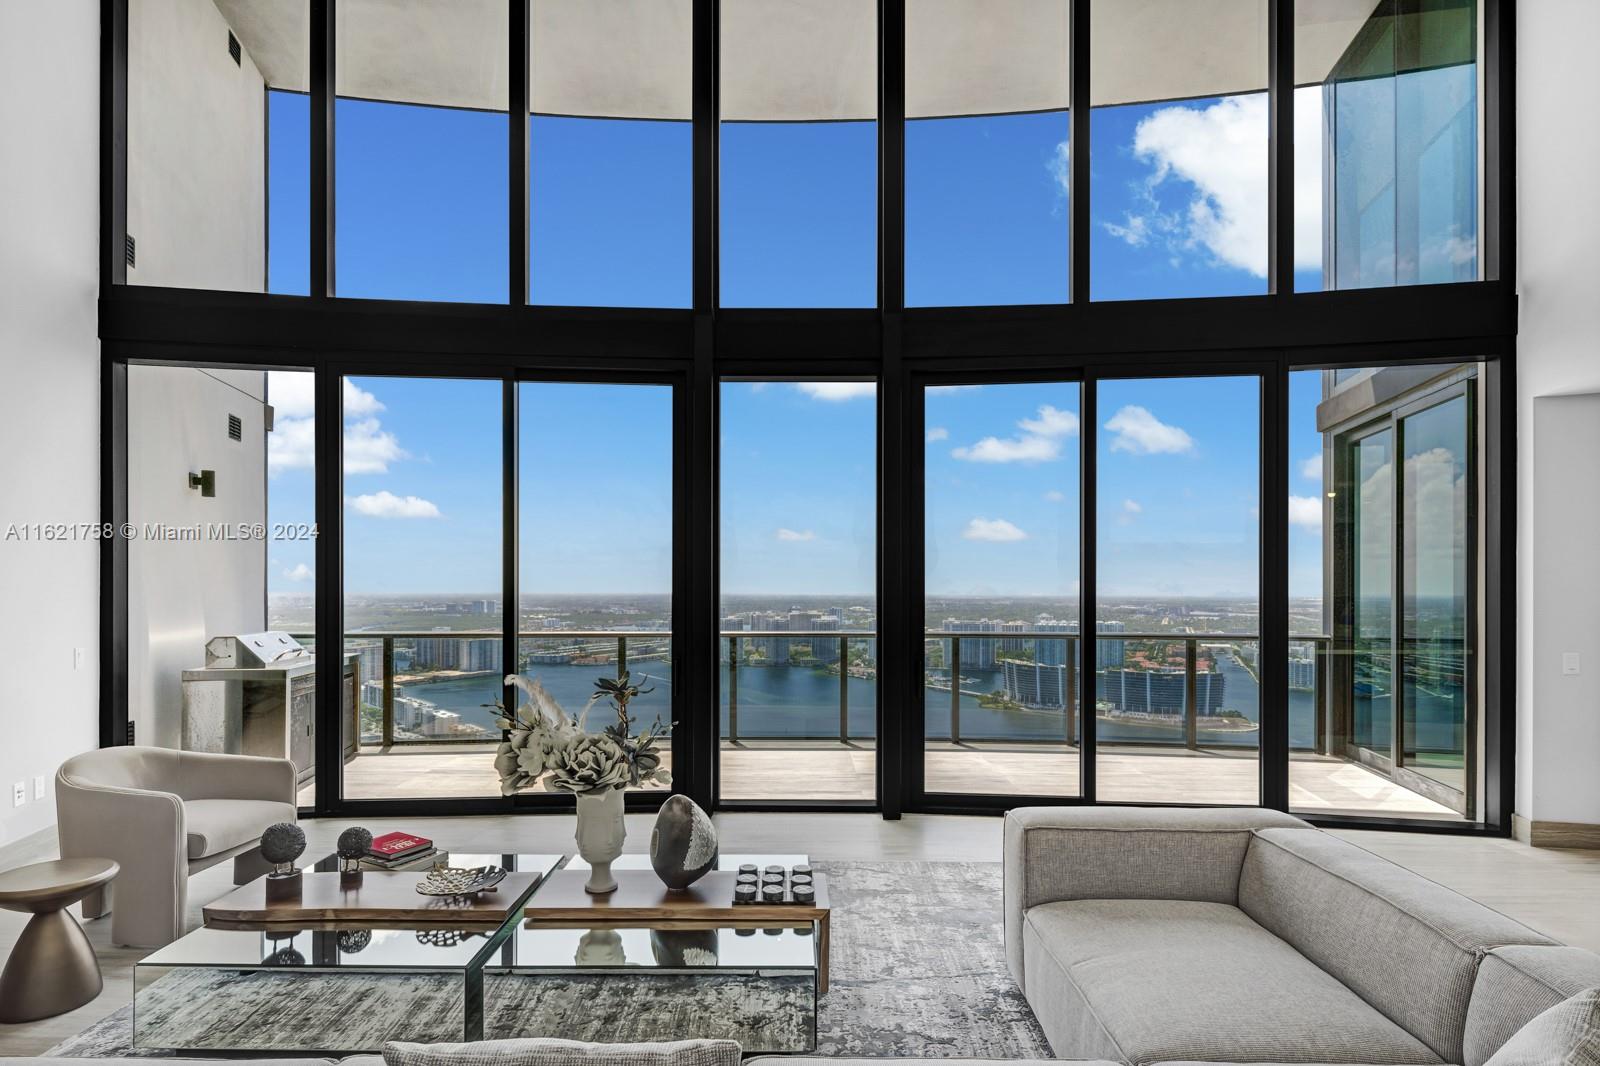 Discover luxury living in this 3-bed, 4.5-bath 3,100 sq ft apartment spanning 3,100 sq ft of sheer opulence. As you enter, you'll be greeted by soaring 21-foot ceilings adorned with floor-to-ceiling windows that offer breathtaking panoramic views of the sunset, downtown Miami, & the tranquil Intracoastal waterway. Indulge in the epitome of modern living with a sprawling balcony, providing ample space for al fresco dining or simply basking in the beauty of Miami's skyline. The sleek & contemporary design features a carbon fiber kitchen, perfect for culinary enthusiasts & entertainers alike. With a 2-car garage & Dezervator car elevator, convenience is key. Elevate your lifestyle with 5-star amenities including concierge service. Welcome home to unparalleled elegance & comfort.